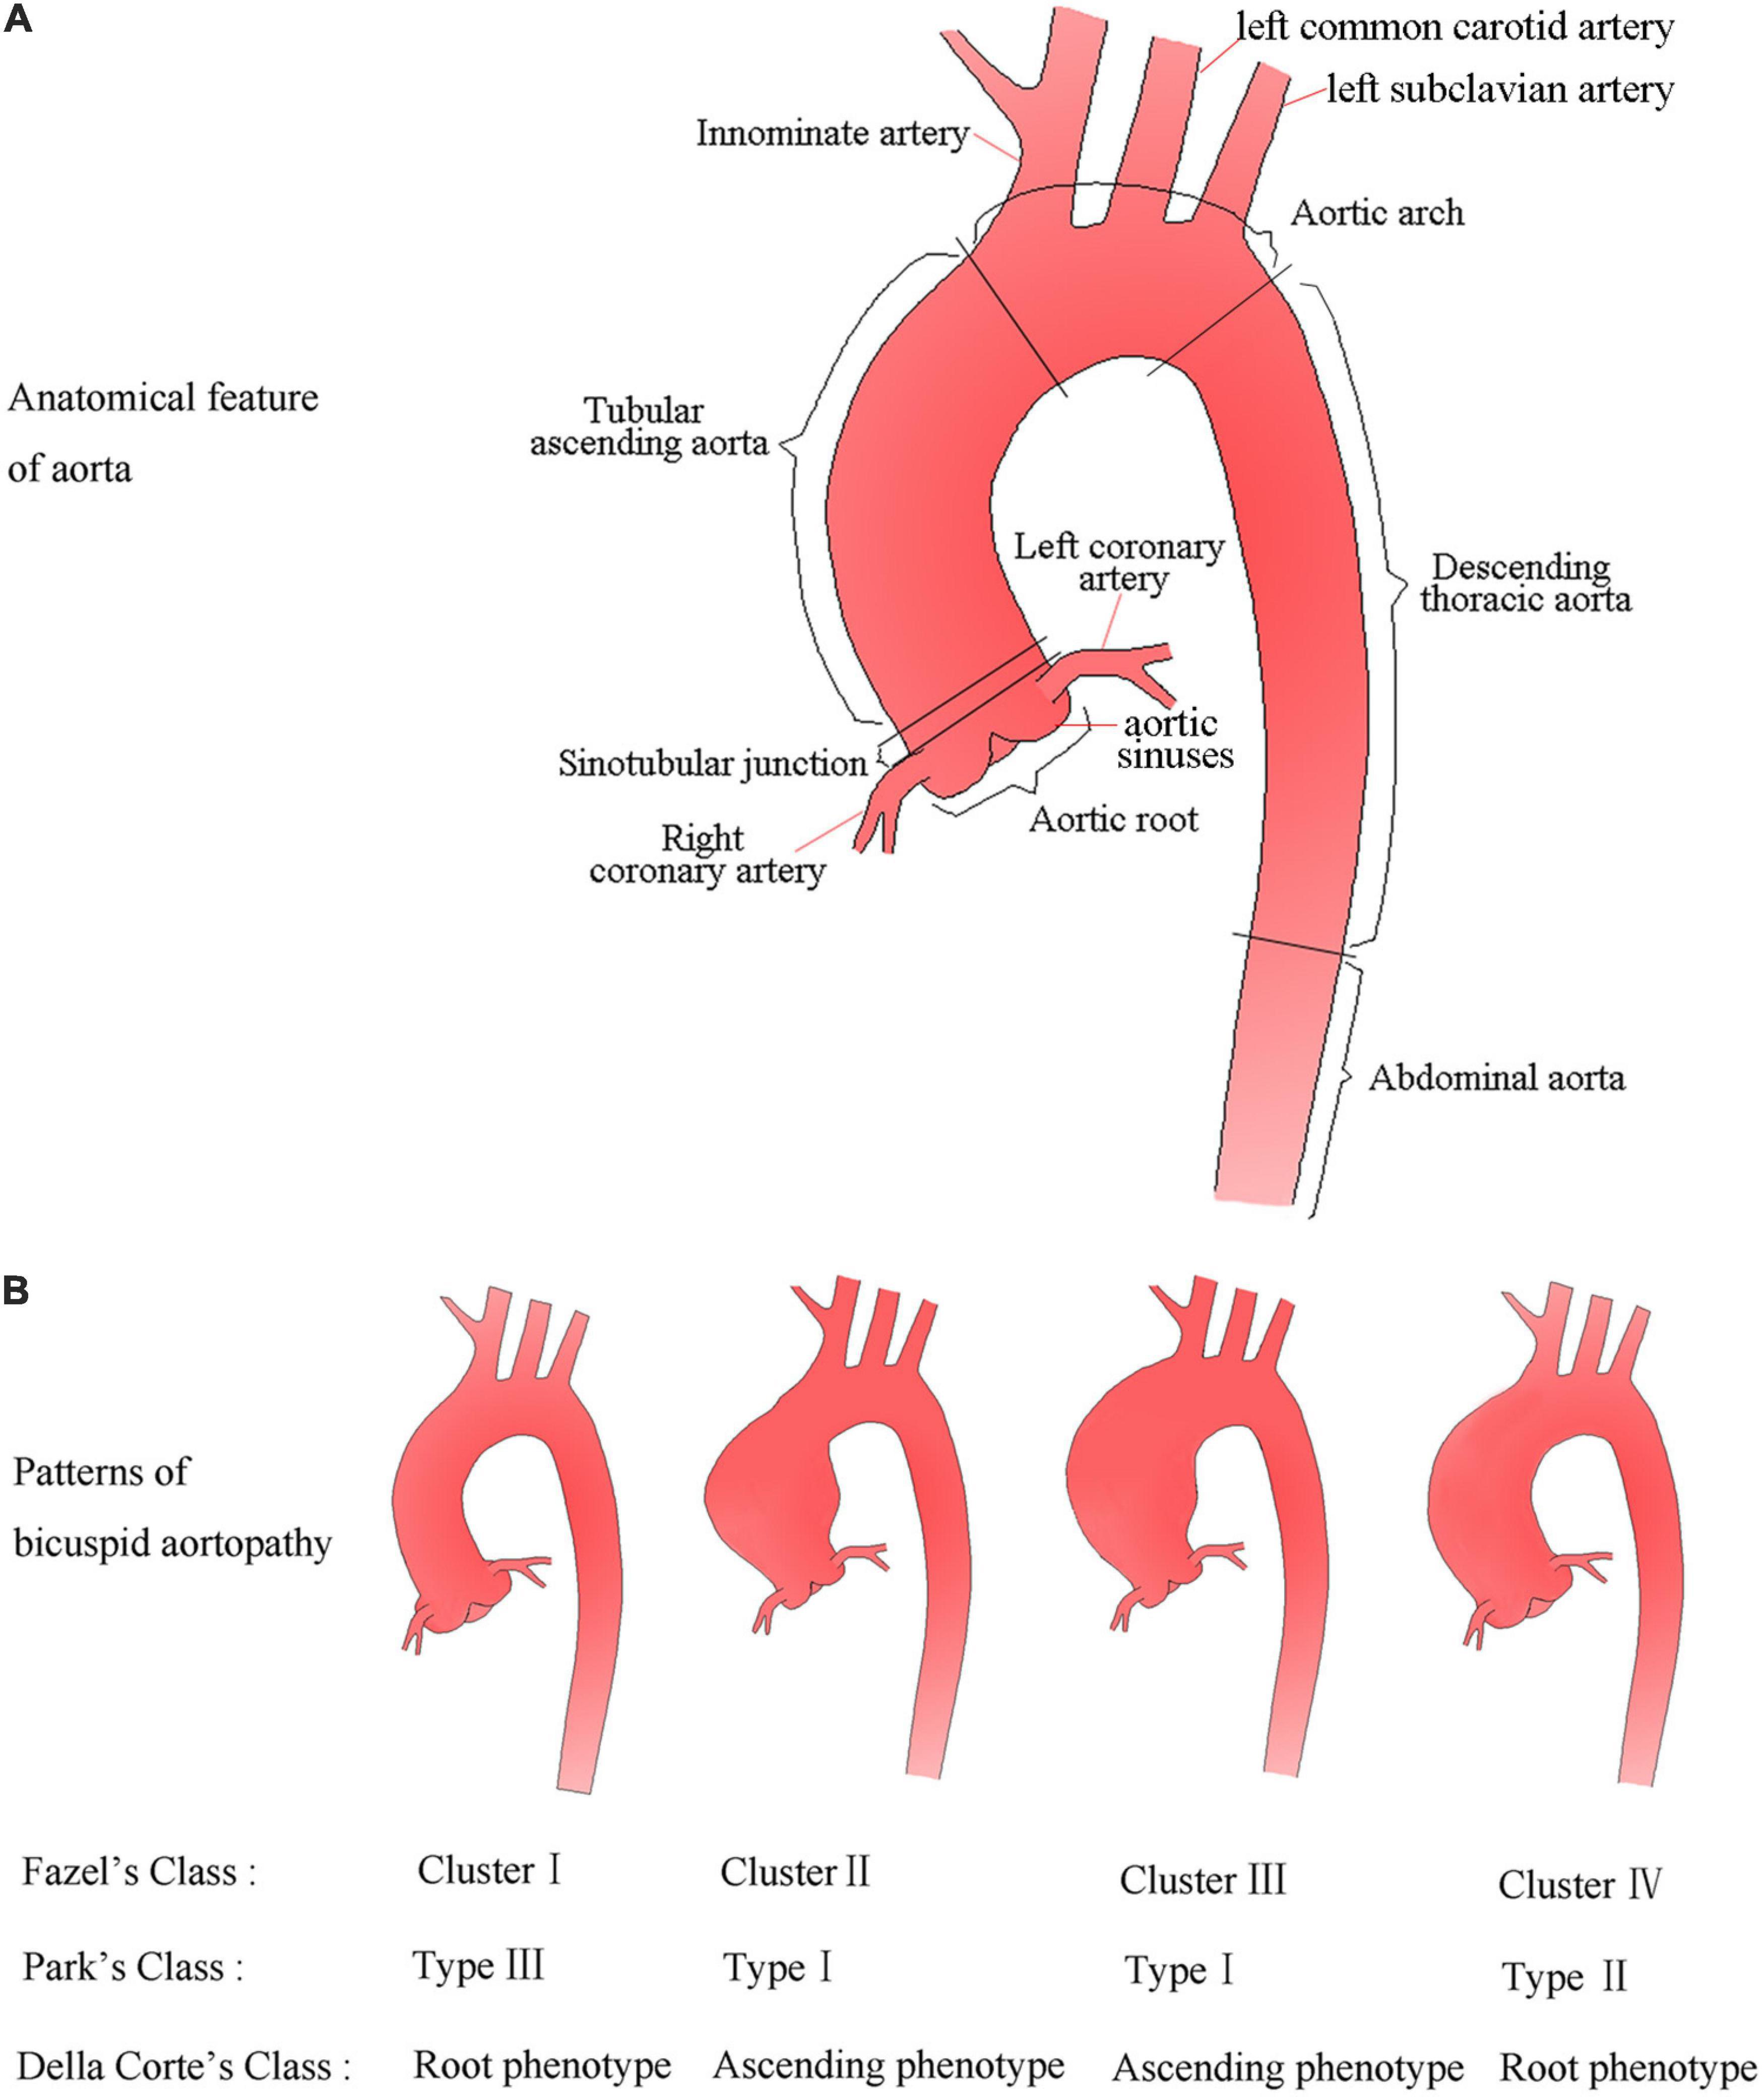 Explanation of terms. The contrast medium aortic arrival time is the